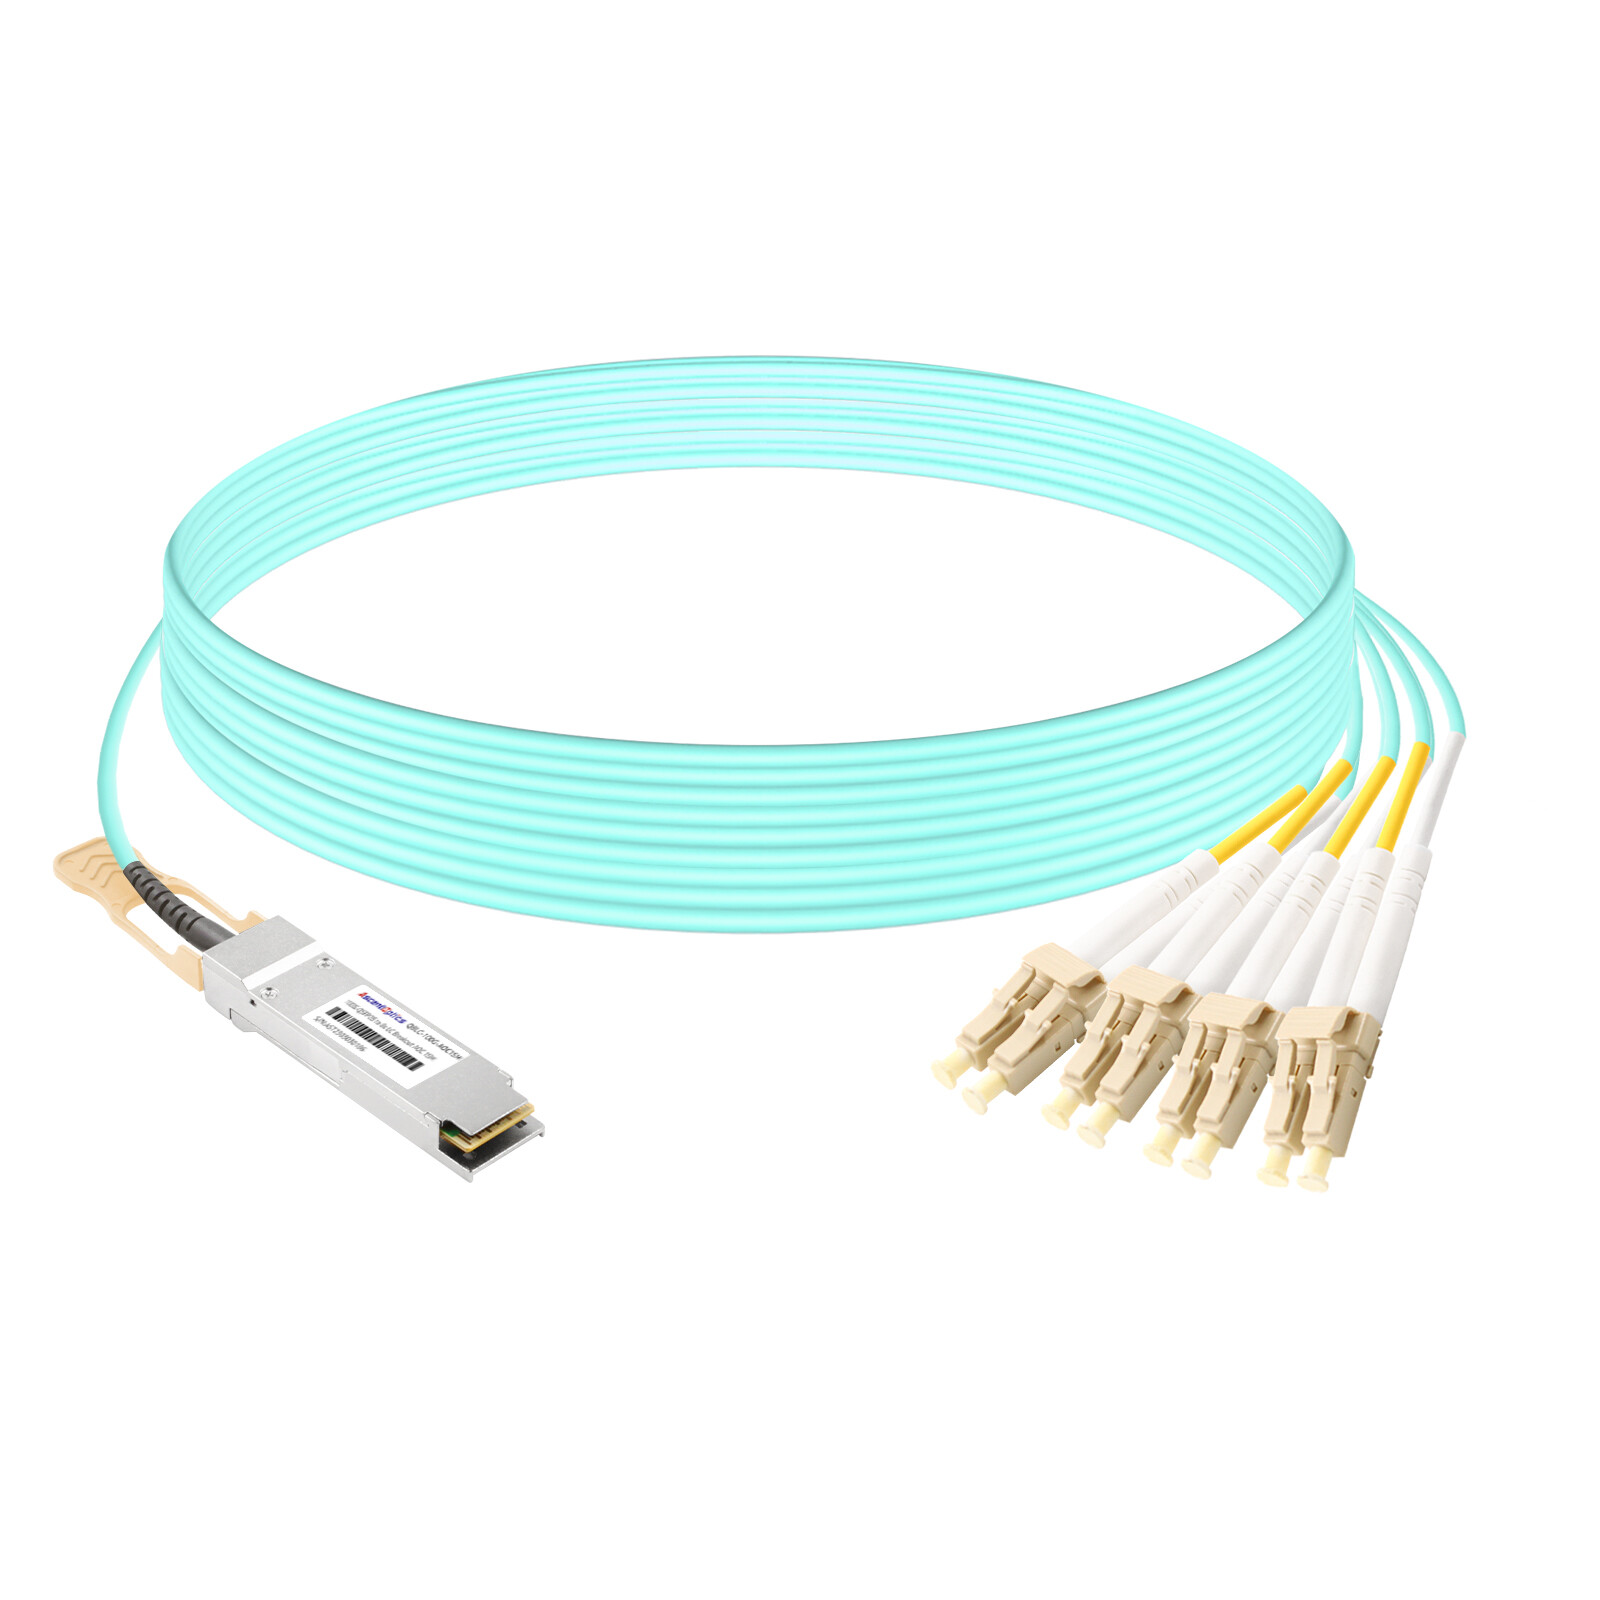 100G QSFP28 to 8x LC Breakout AOC Cable,15 Meters